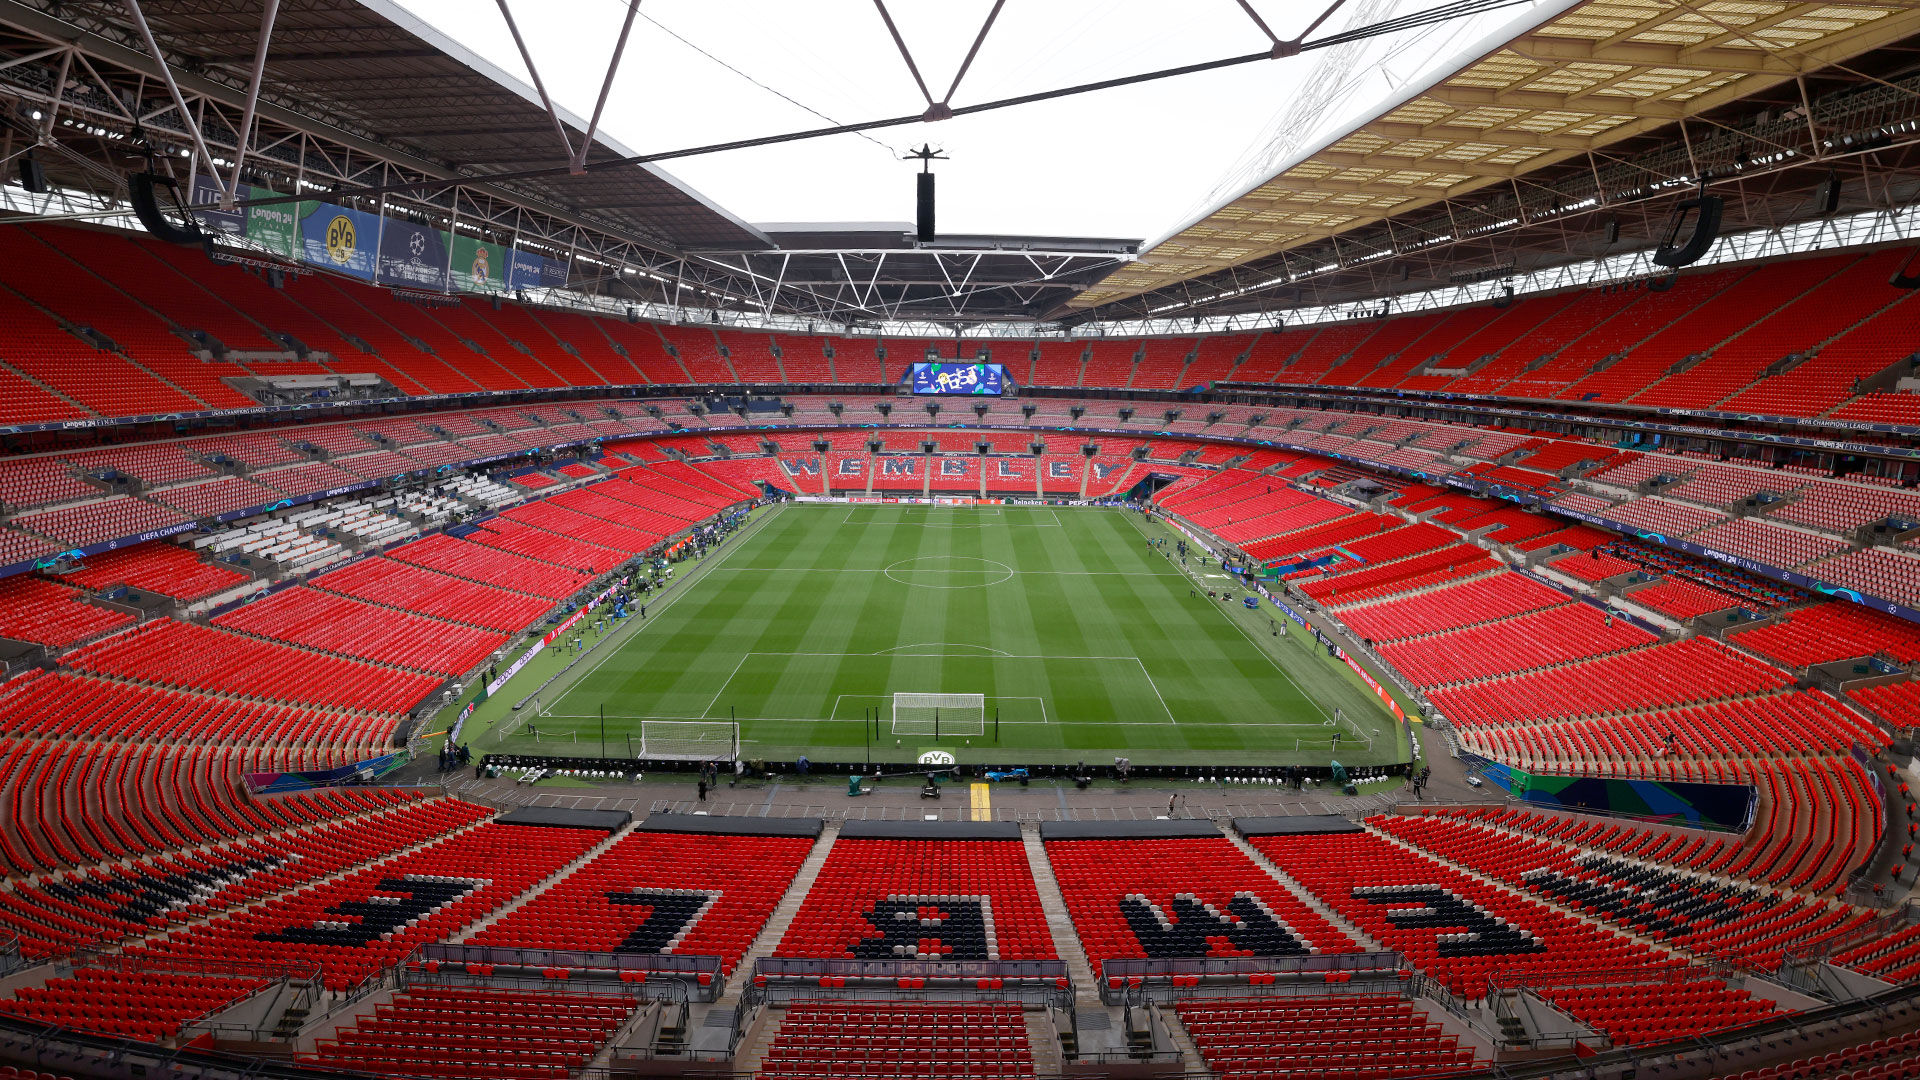 This is Wembley, the setting for the Champions League Final